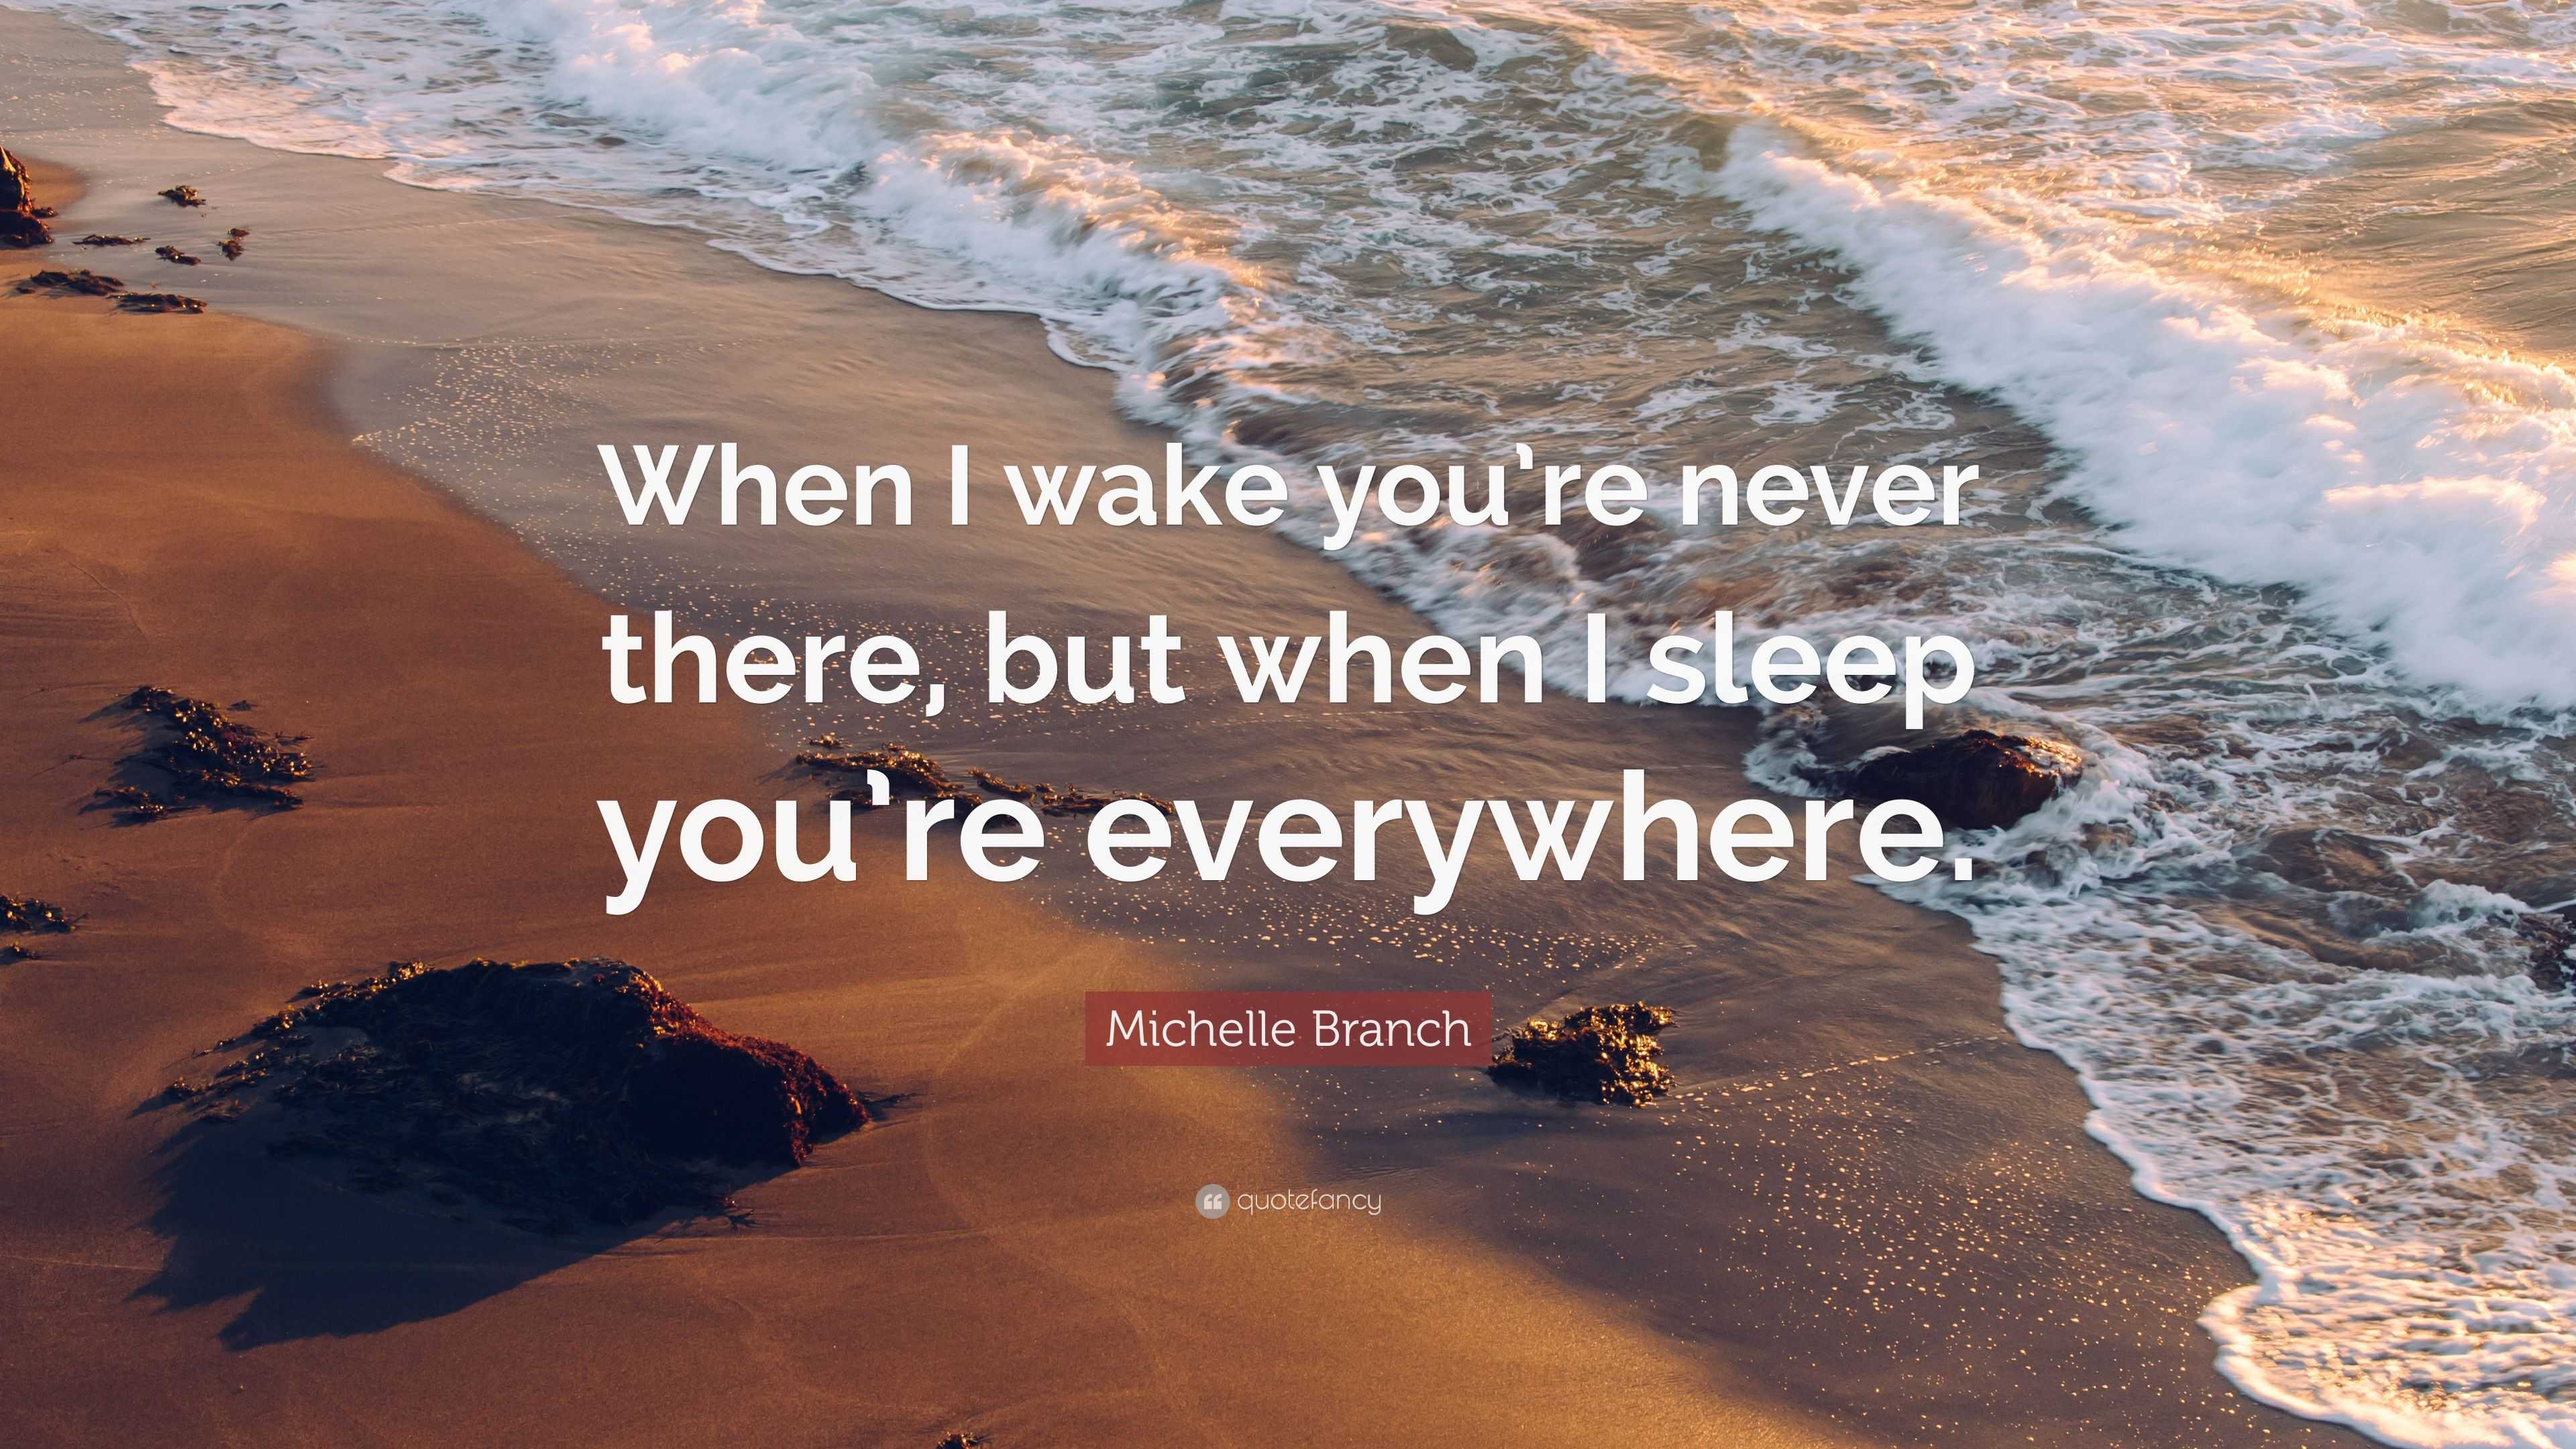 Michelle Branch Quote: “When I wake you're never there, but when I sleep  you're